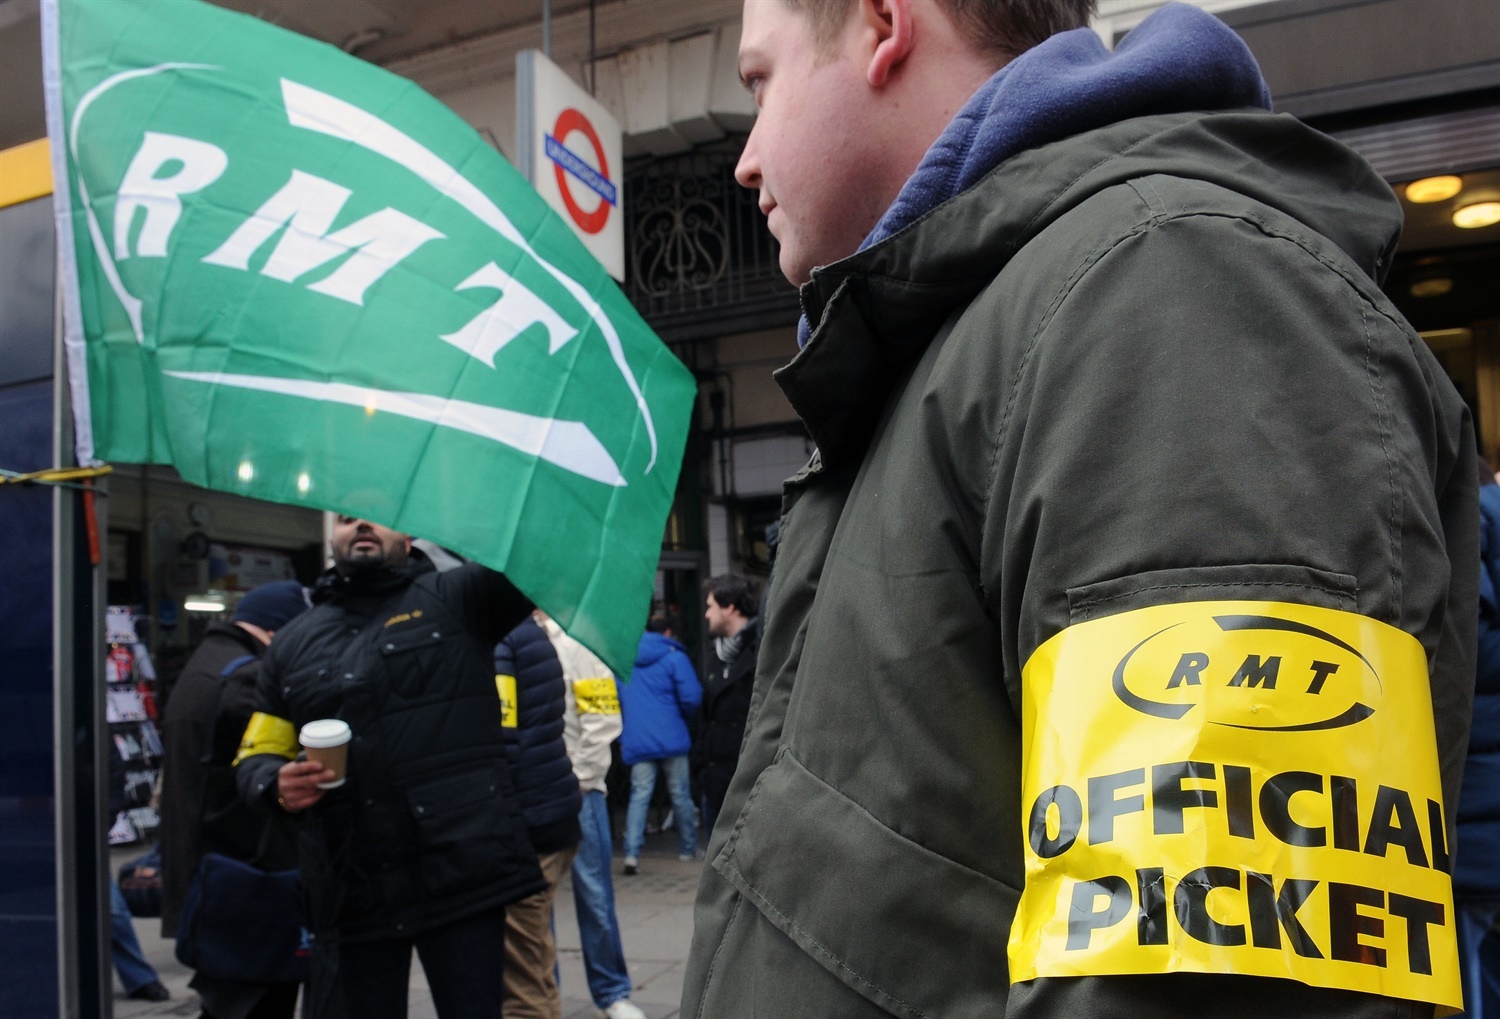 RMT calls off strike action following Manchester attack